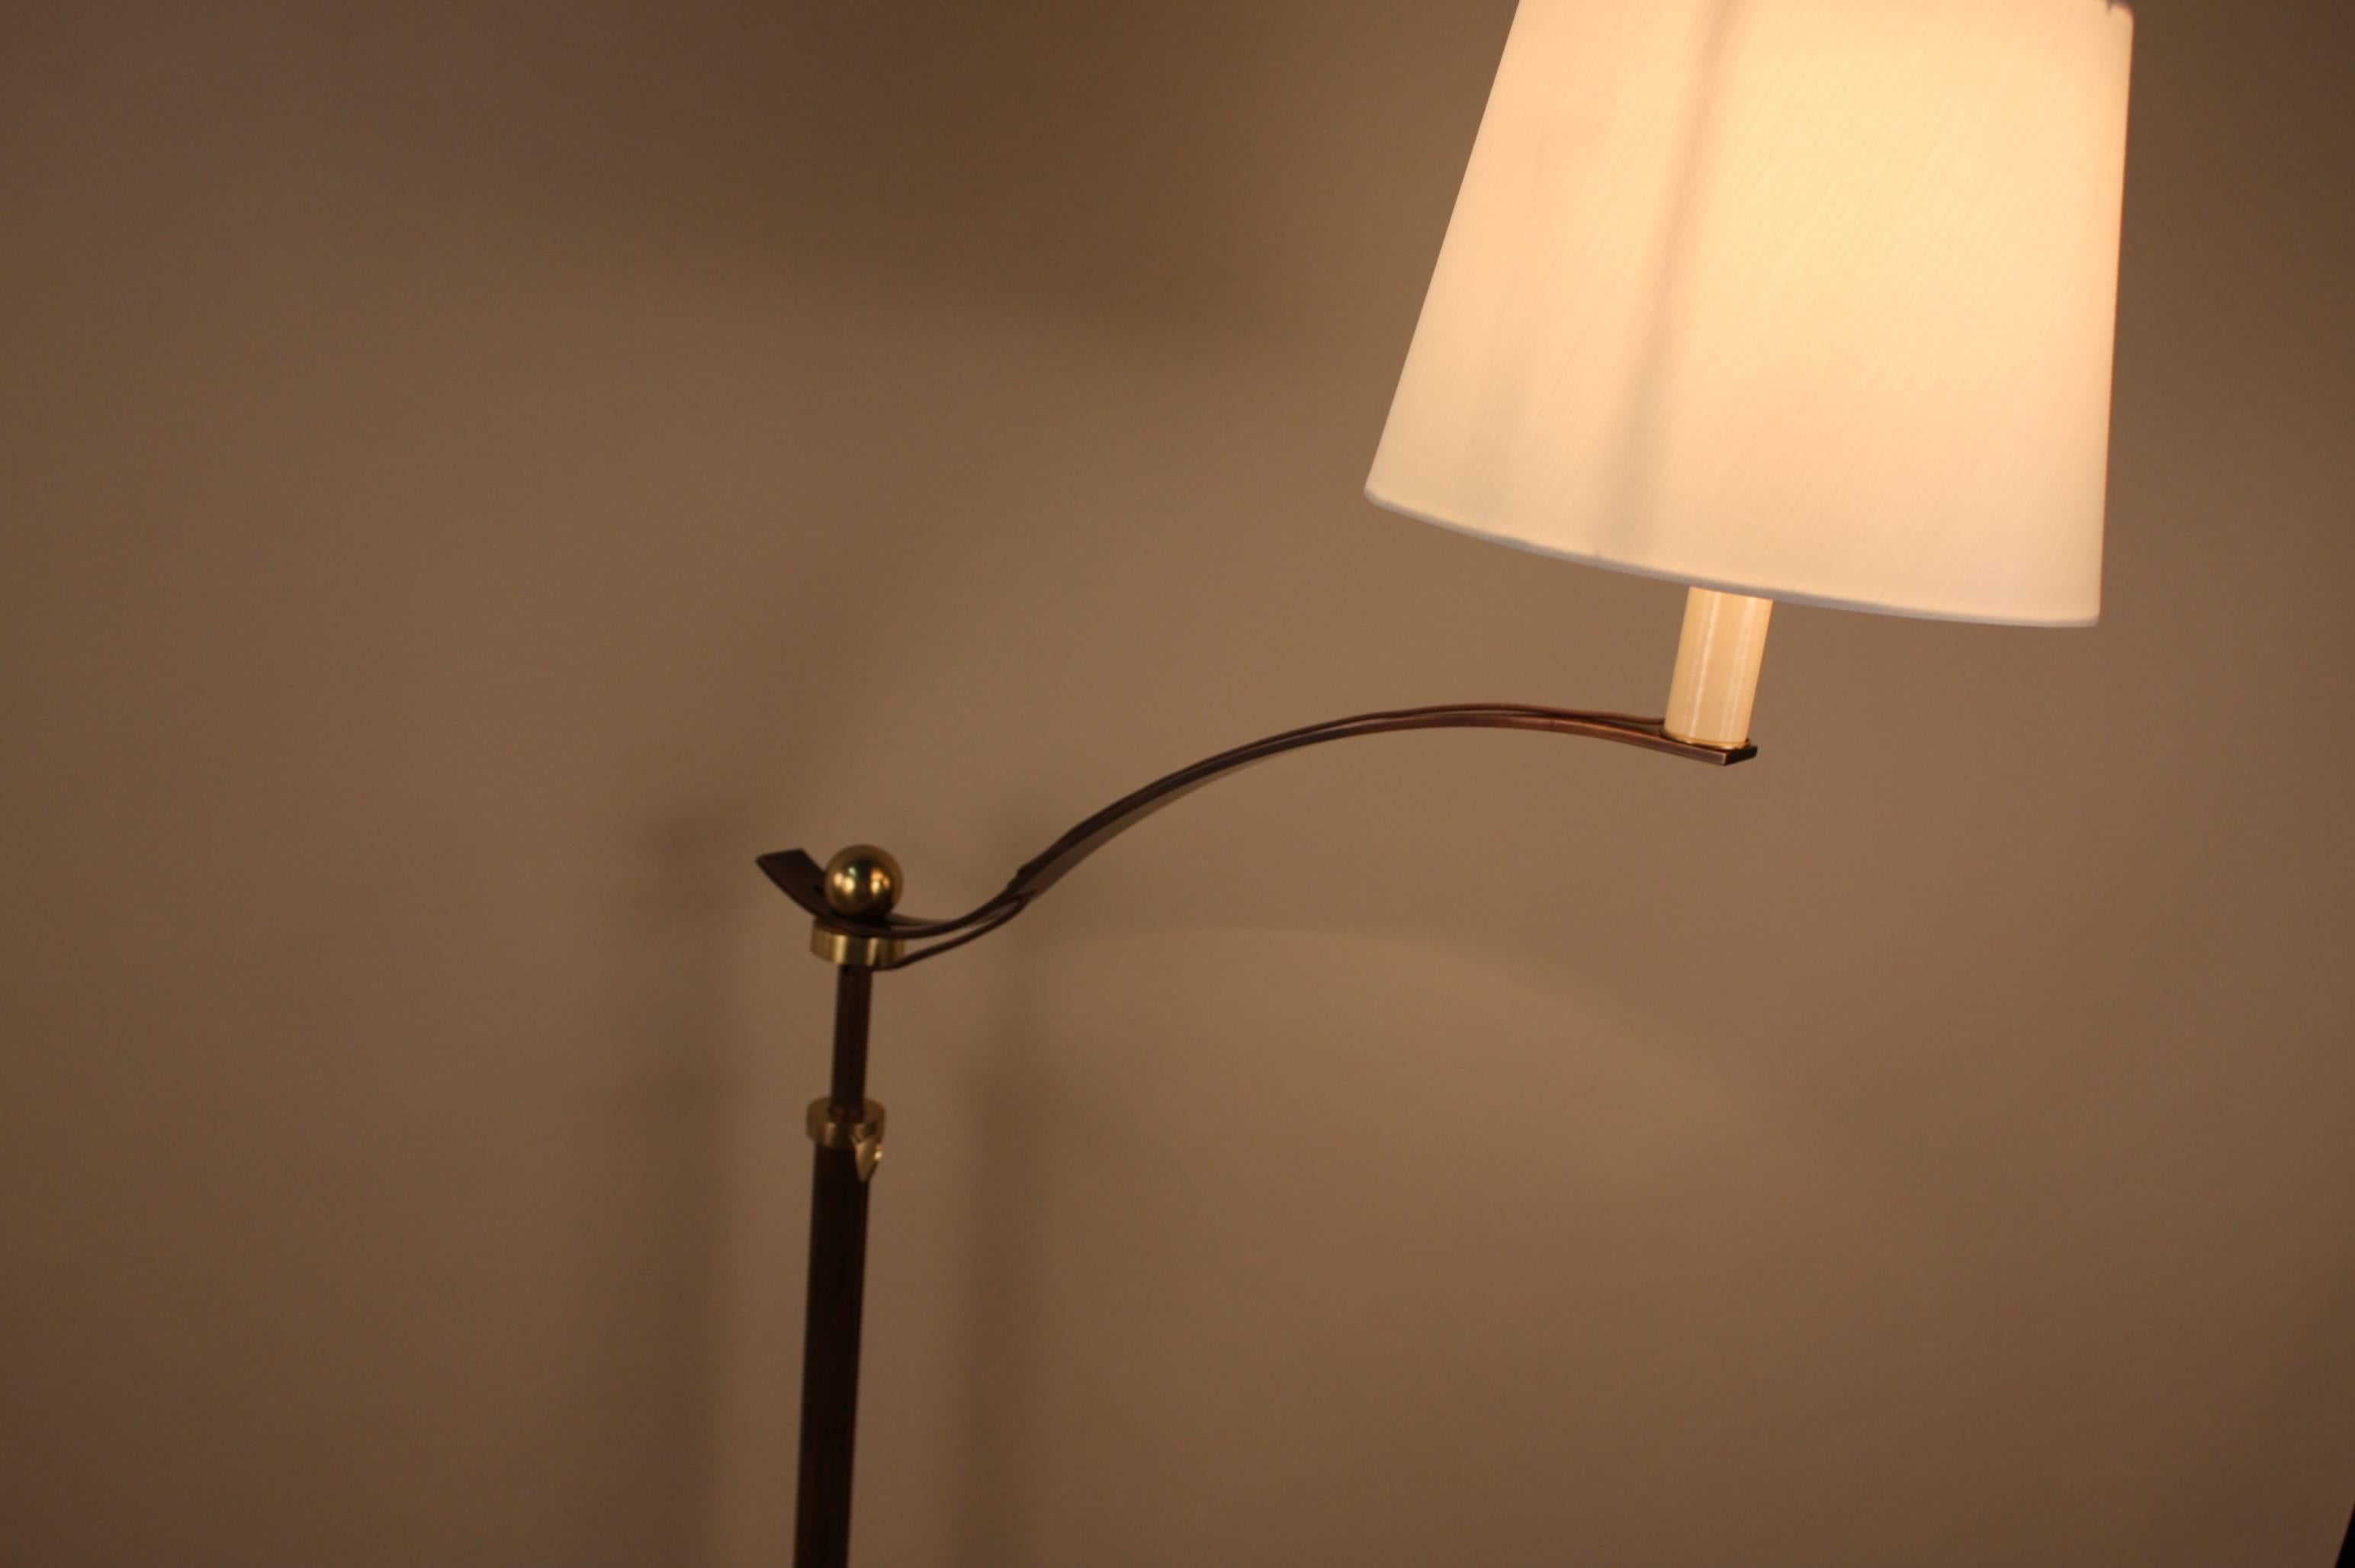 This unique and elegant floor lamp has adjustable height as well as adjustable arm for positioning the arm for perfect reading position.